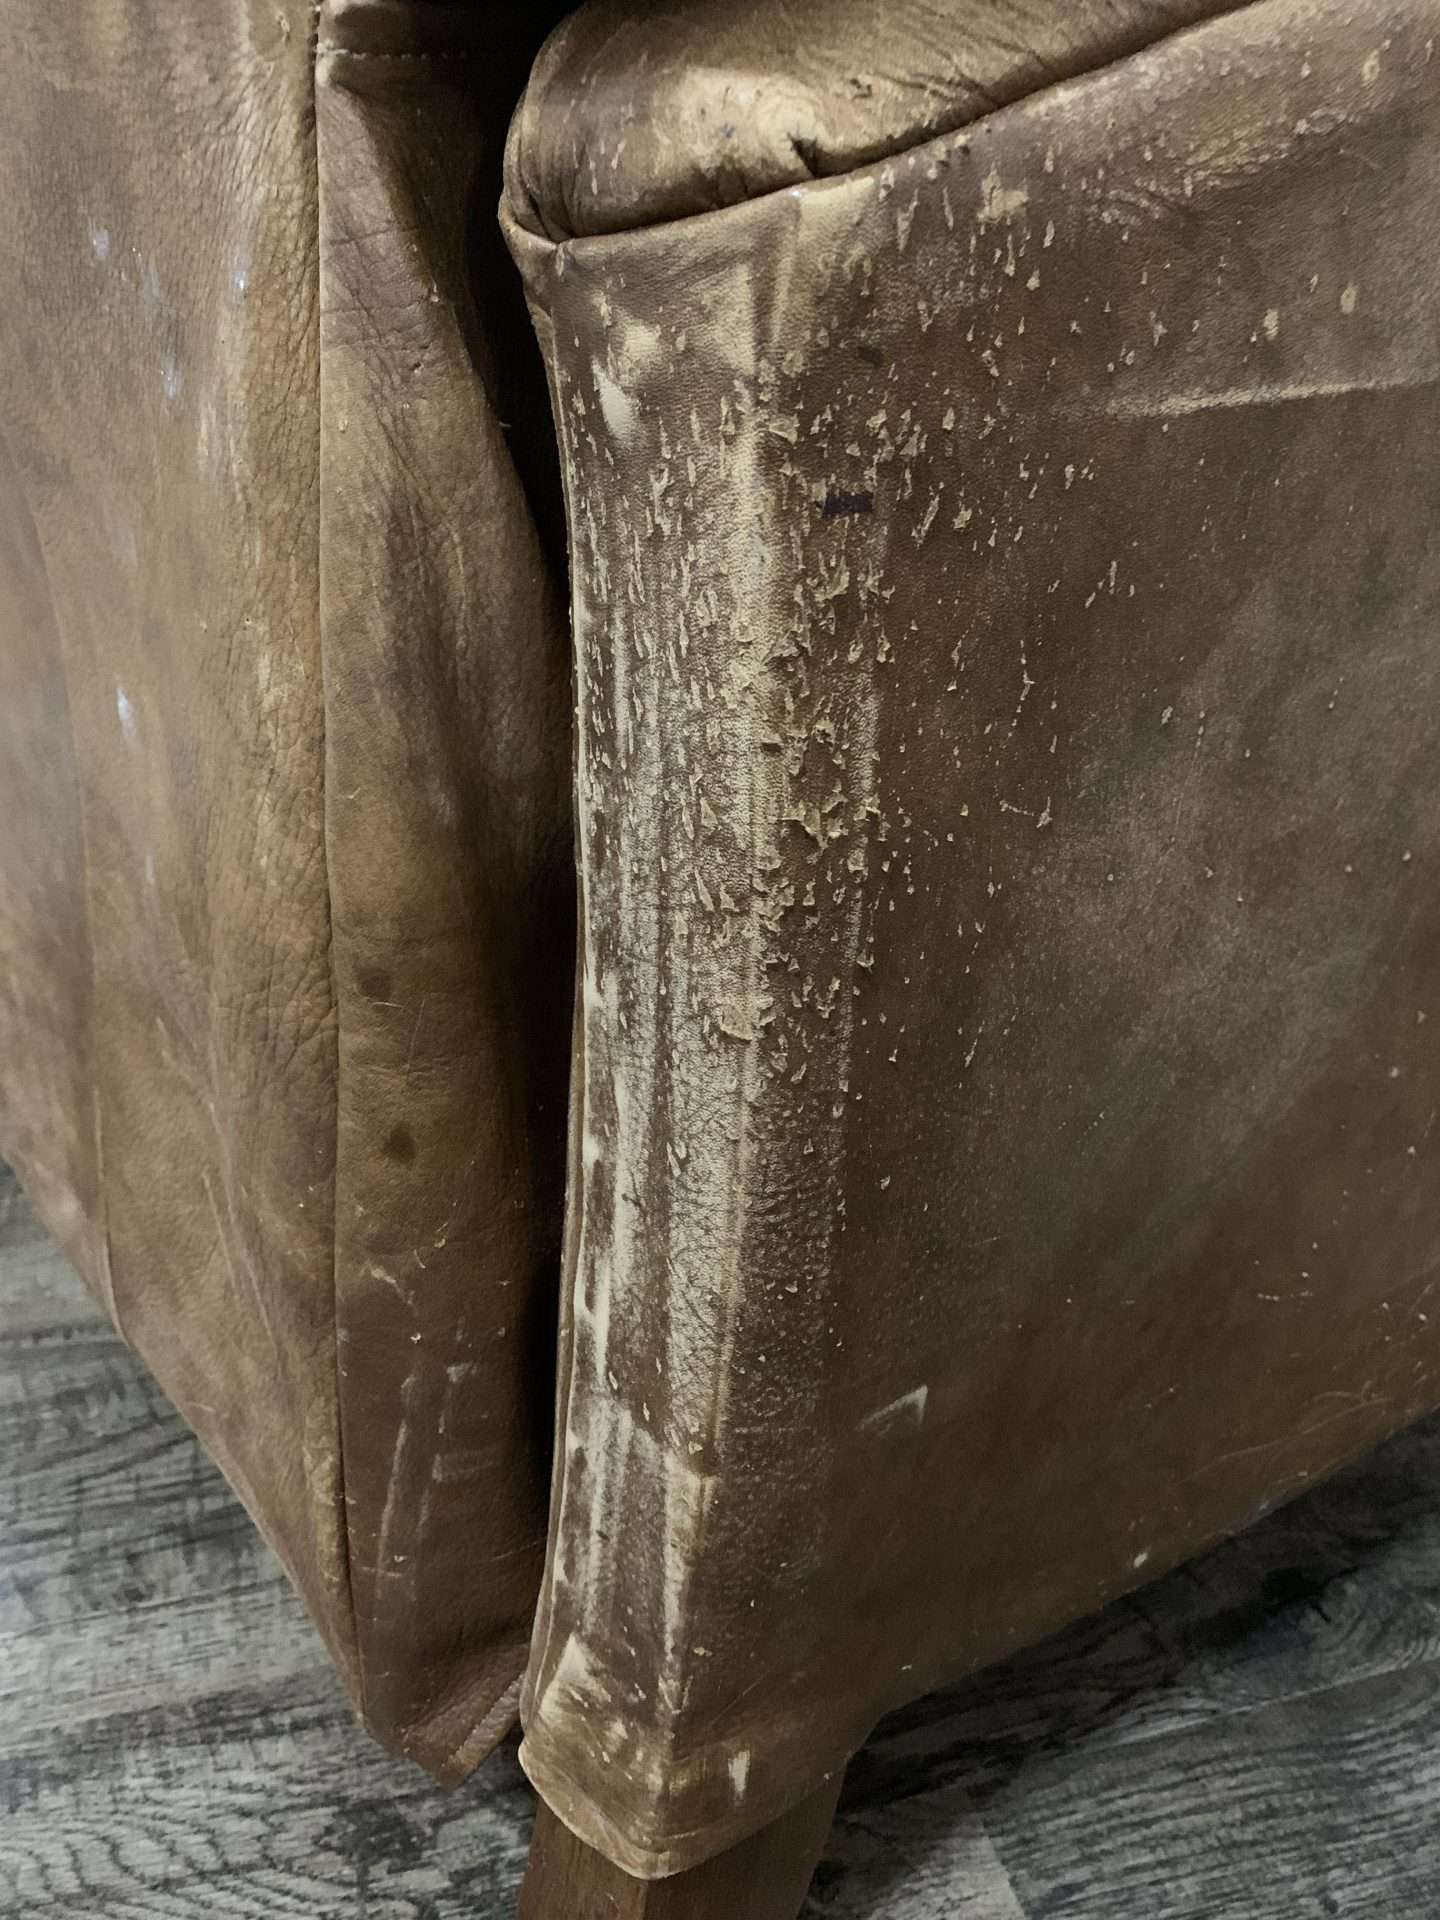 How to repair and dye leather furniture even when it's damaged.